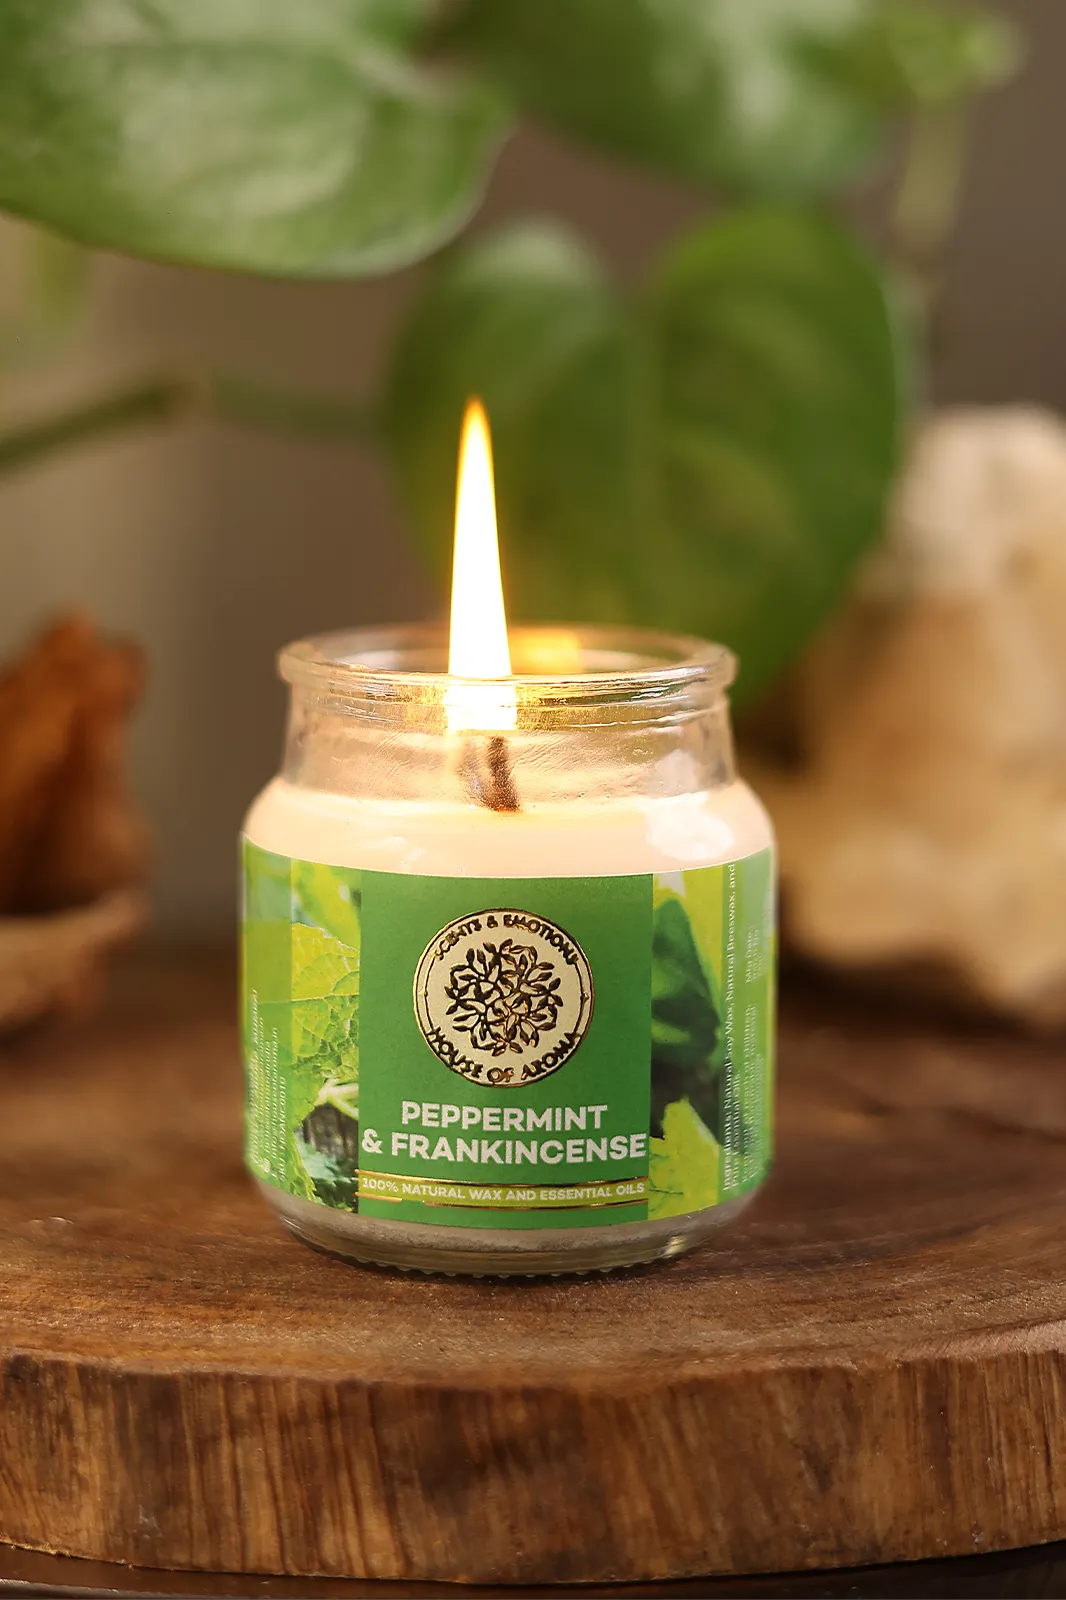 peppermint Frankincense Natural Scented Candle, peppermint candle, frankincense candle, Natural Scented Candle, scented candles online, natural candles, frankincense fragrance, peppermint oil, soy natural candles, peppermint fragrance oil, house of aroma